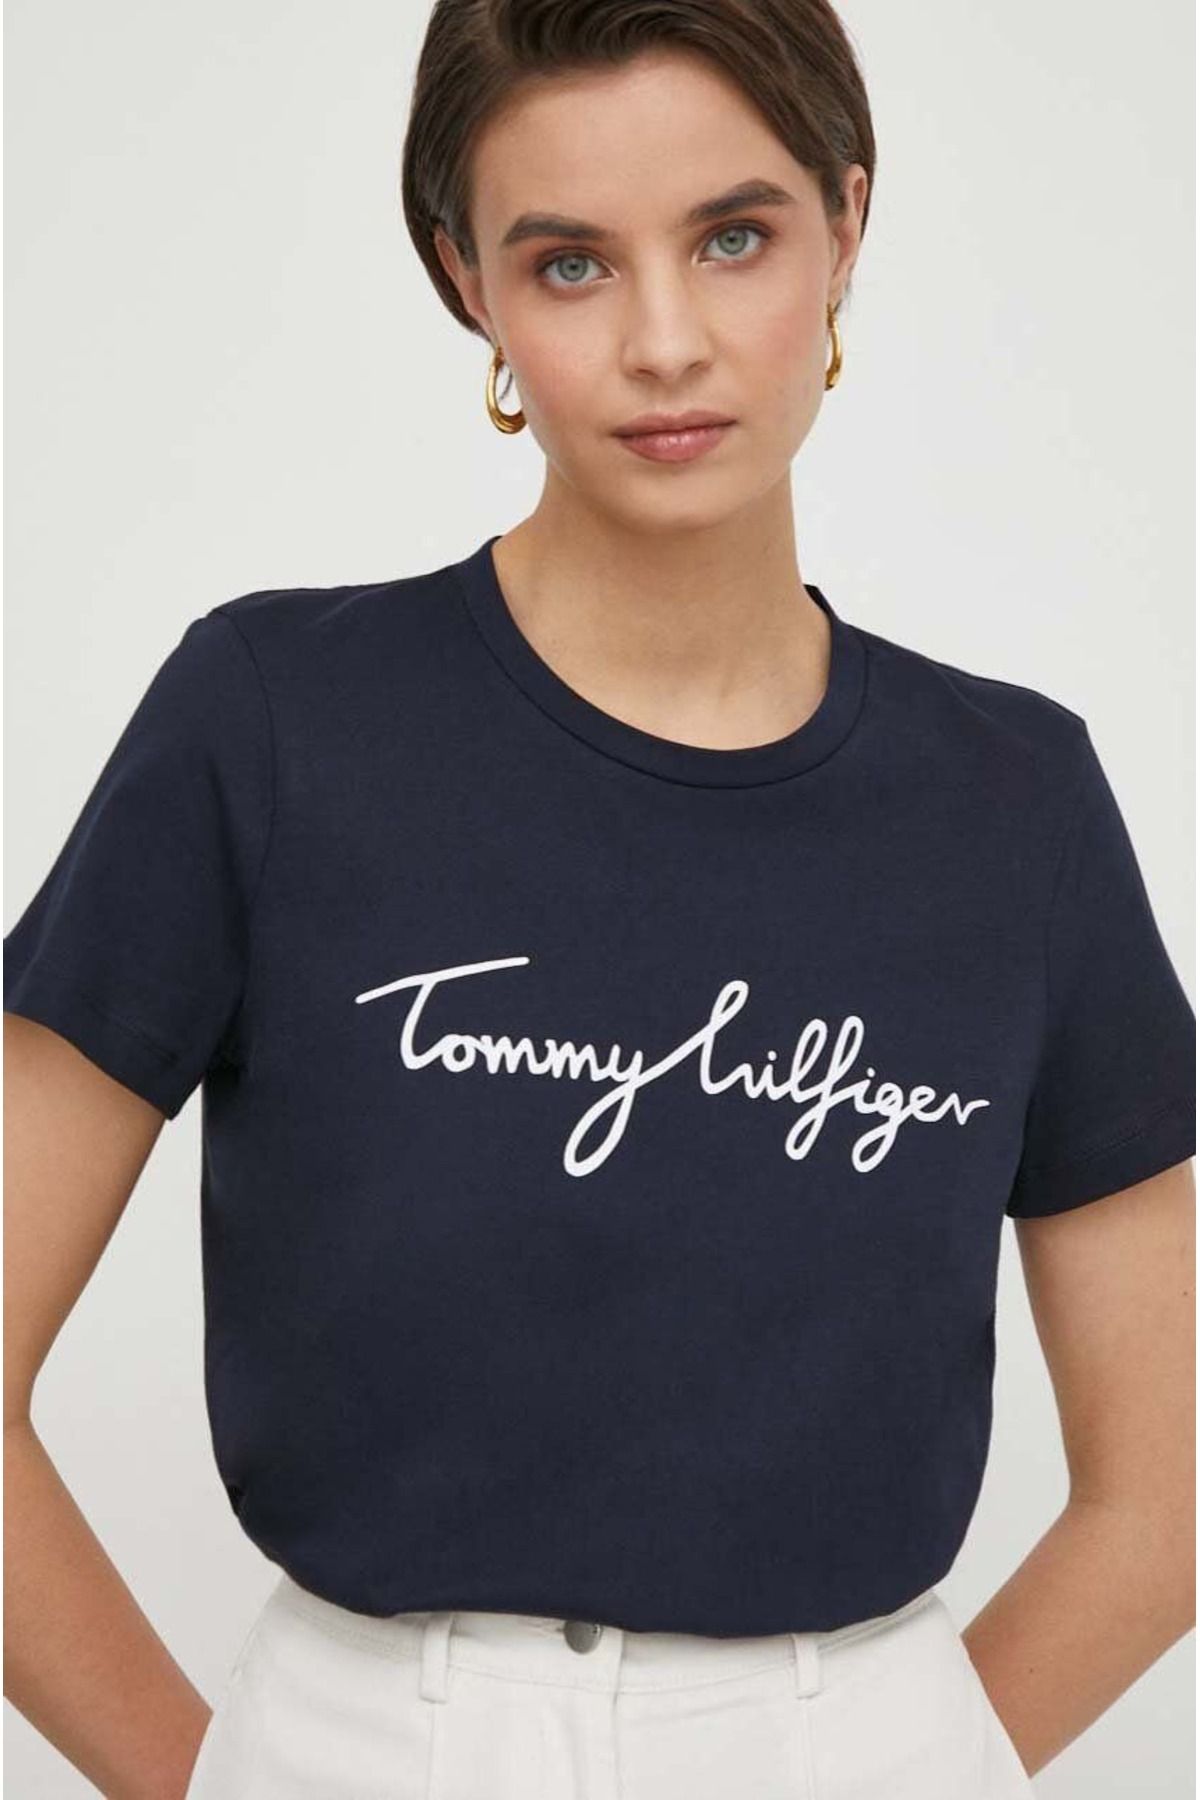 Tommy Hilfiger CREW NECK GRAPHIC TEE T-SHIRT